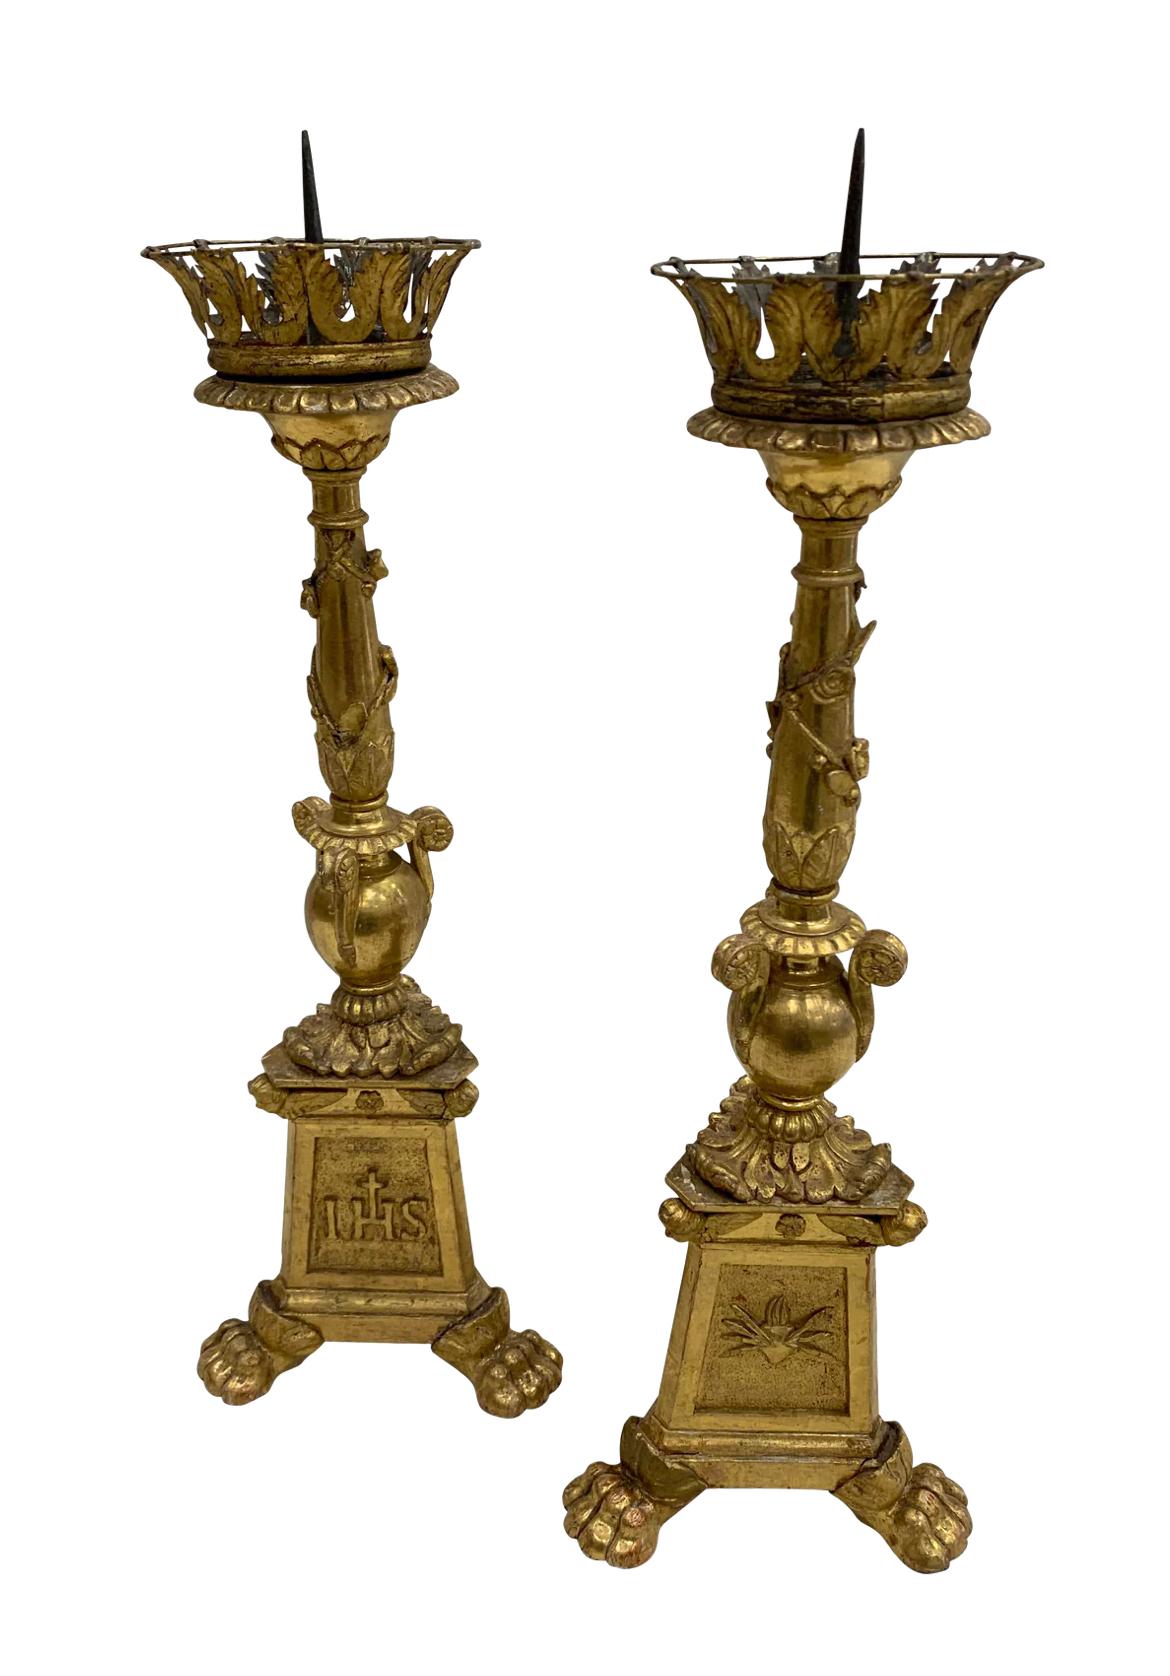 Beautiful set of 18th century Cathedral Candlesticks. Purchased in Lucca, Italy. Check out the angel carvings and stunning craftsmanship on this pair. We have not seen many like these available EVER. Restored by the #1 restorer for the Vatican for